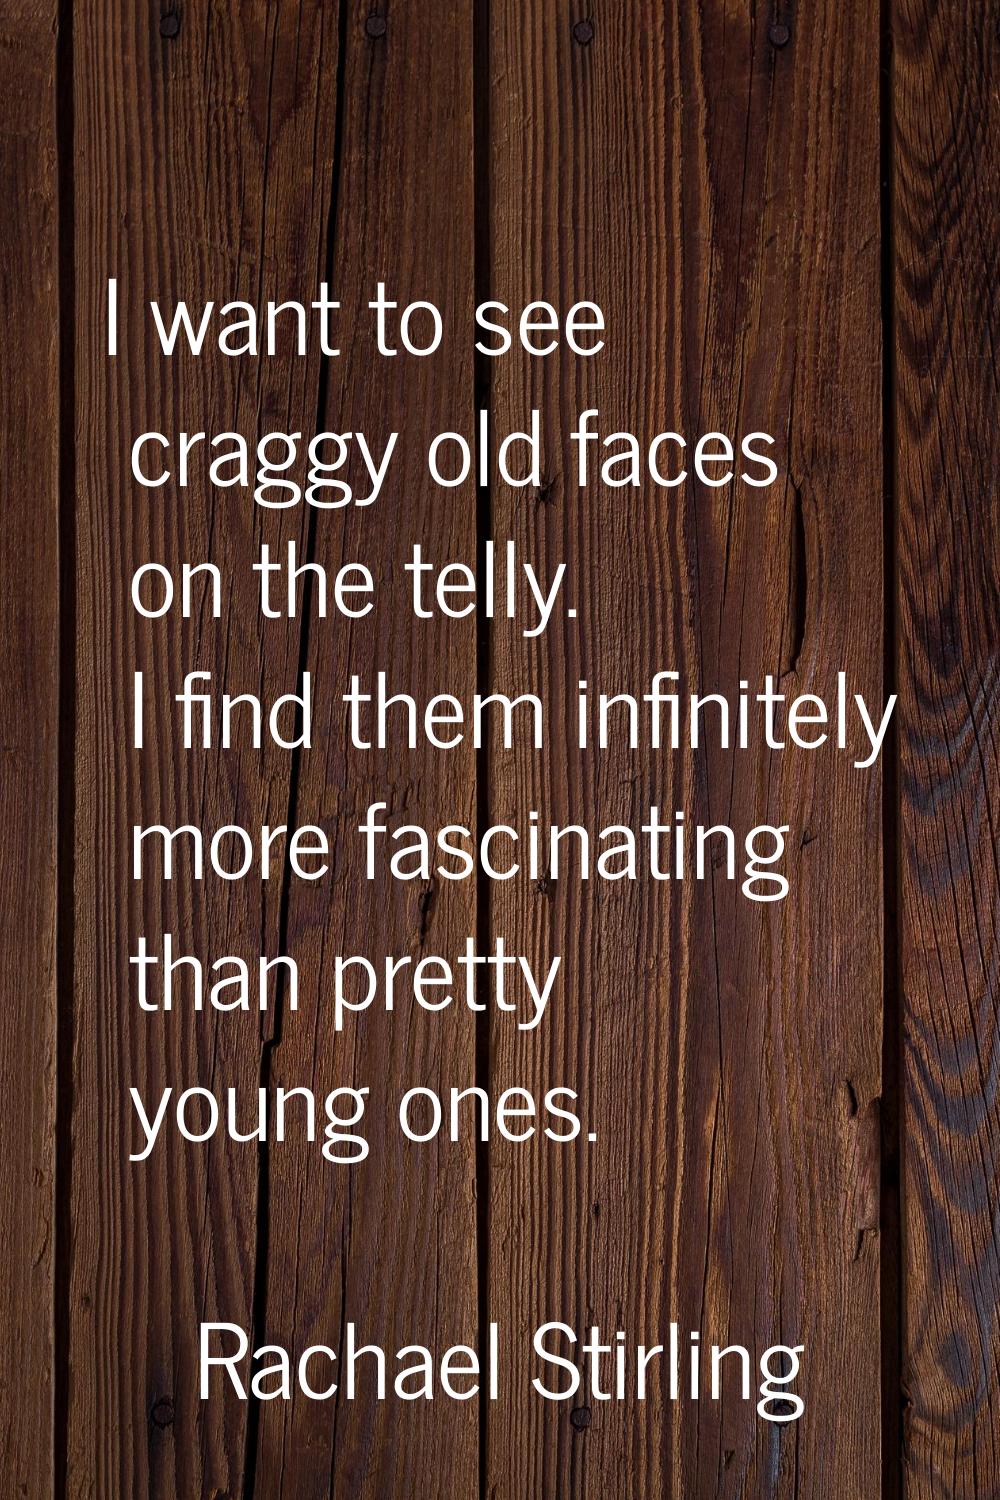 I want to see craggy old faces on the telly. I find them infinitely more fascinating than pretty yo